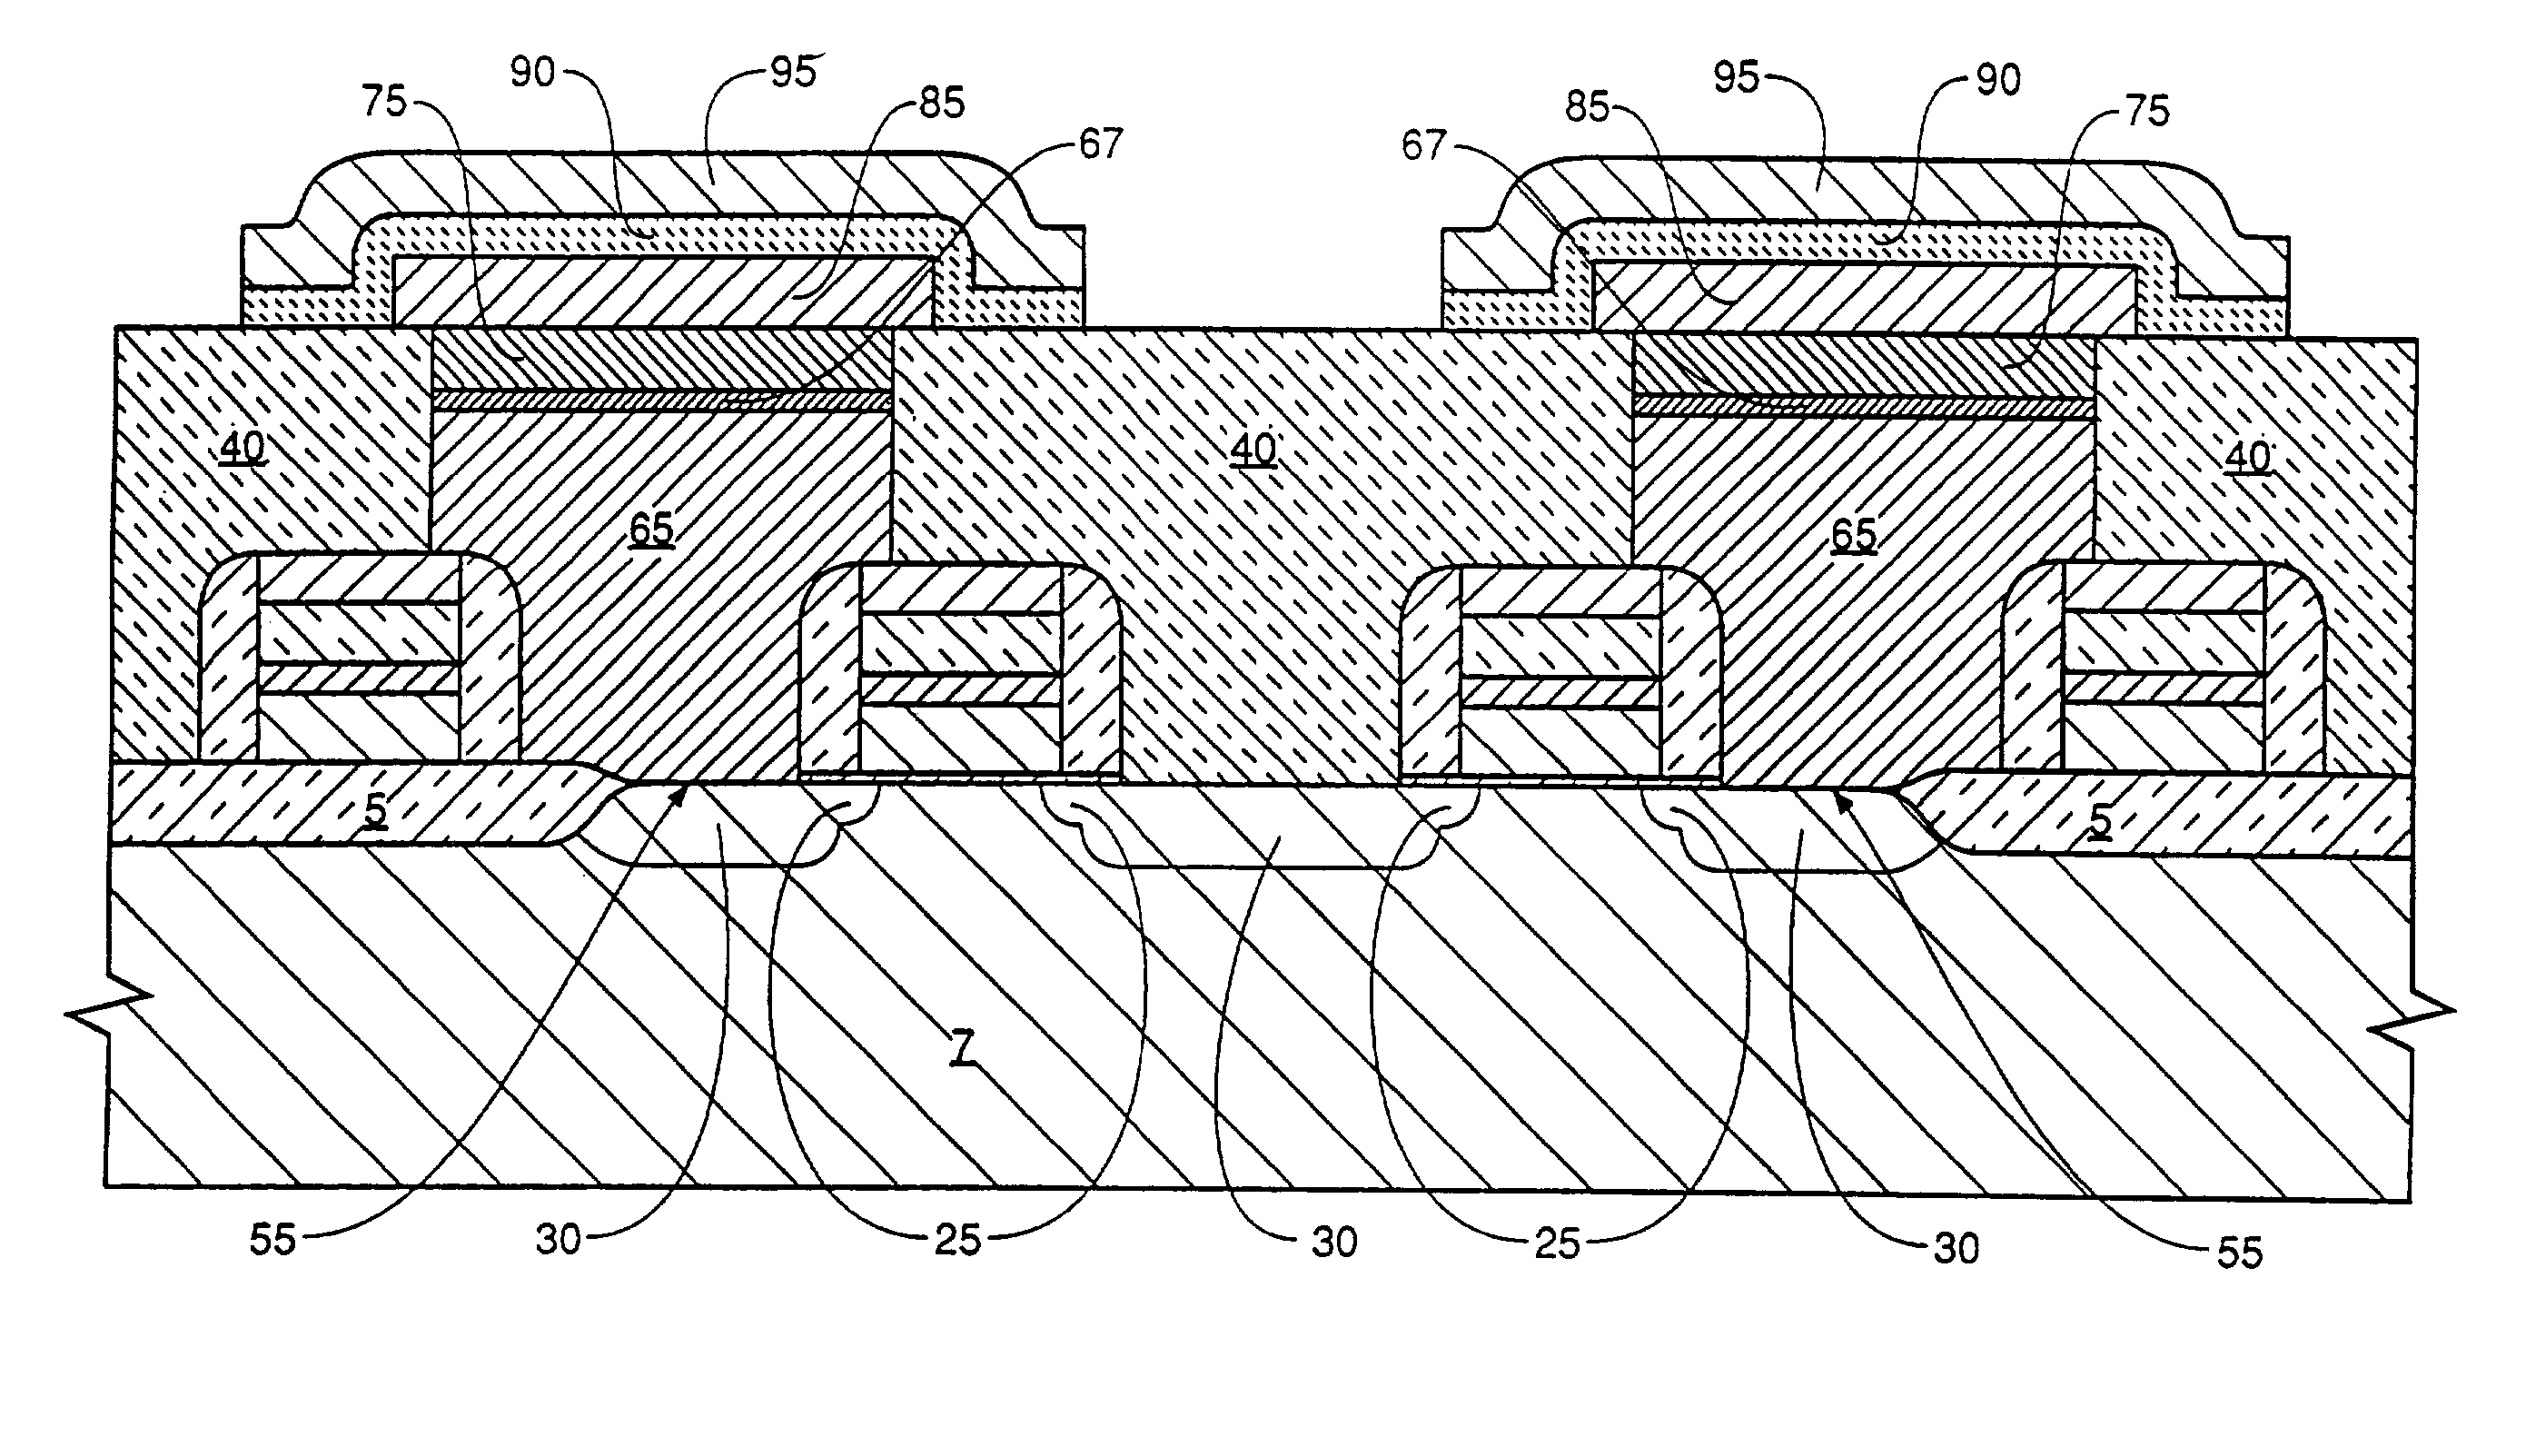 Capacitor compatible with high dielectric constant materials having a low contact resistance layer and the method for forming same